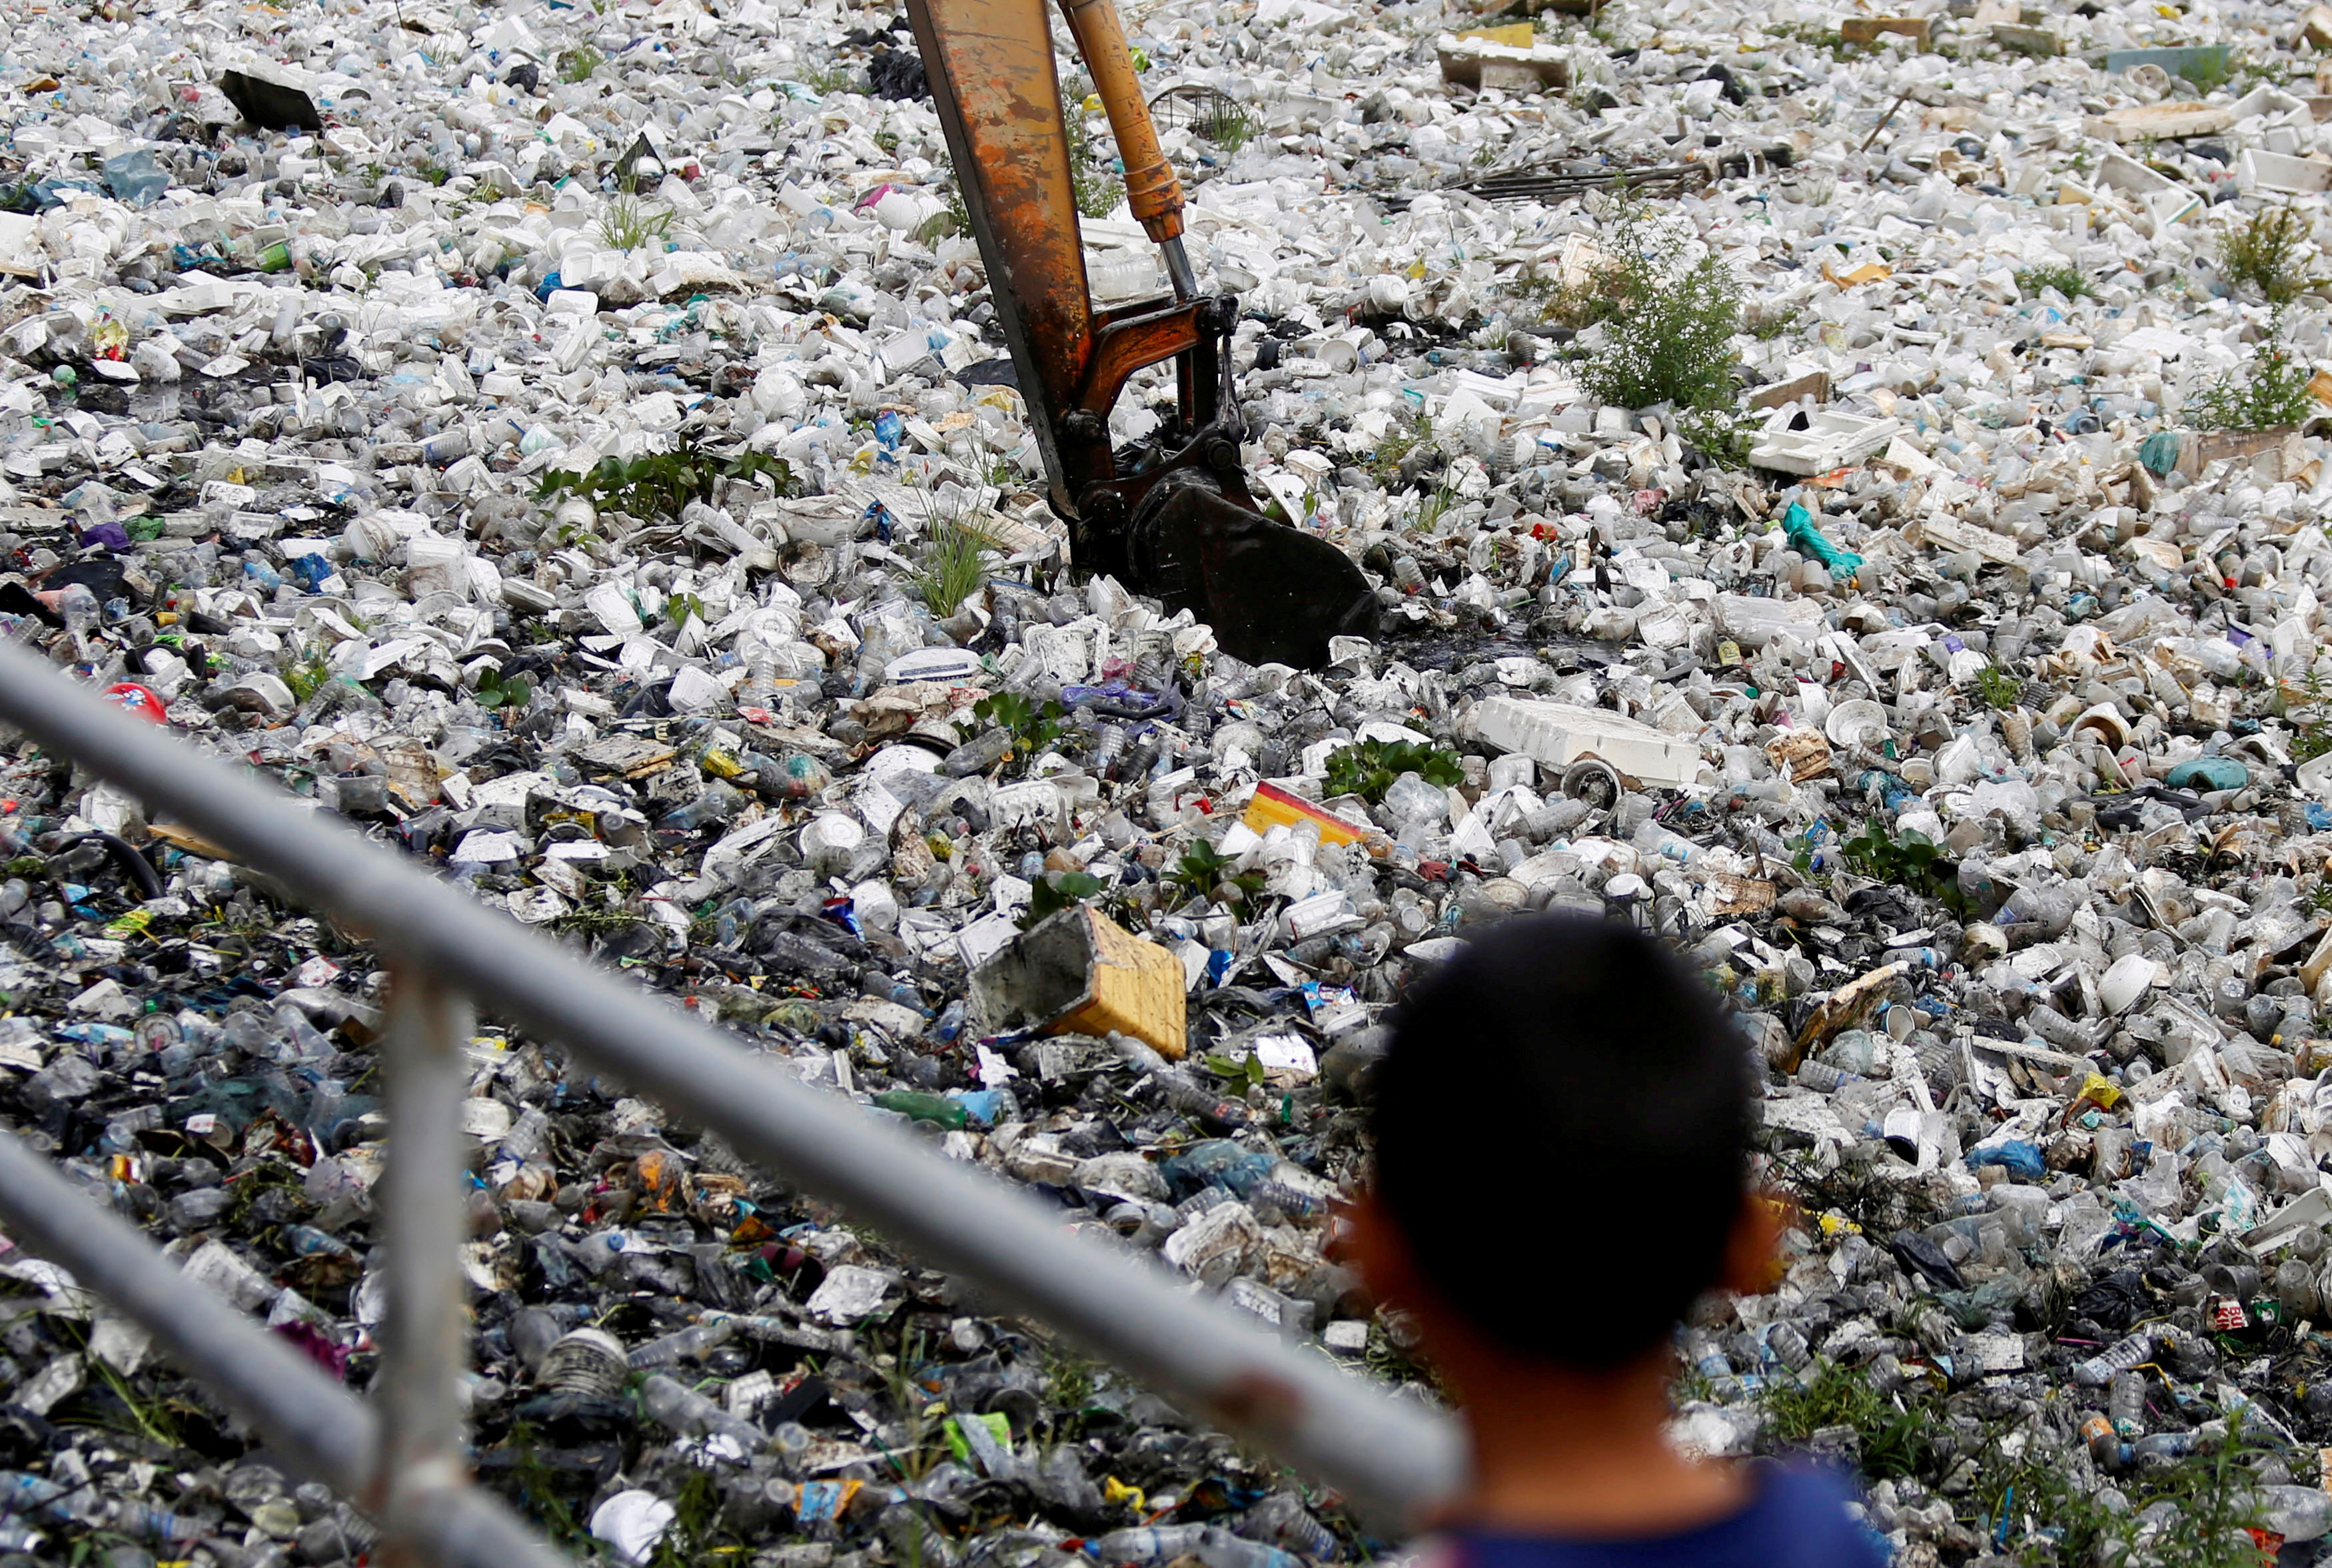 A child watches as heavy machinery collects rubbish at a sewage canal in Phnom Penh